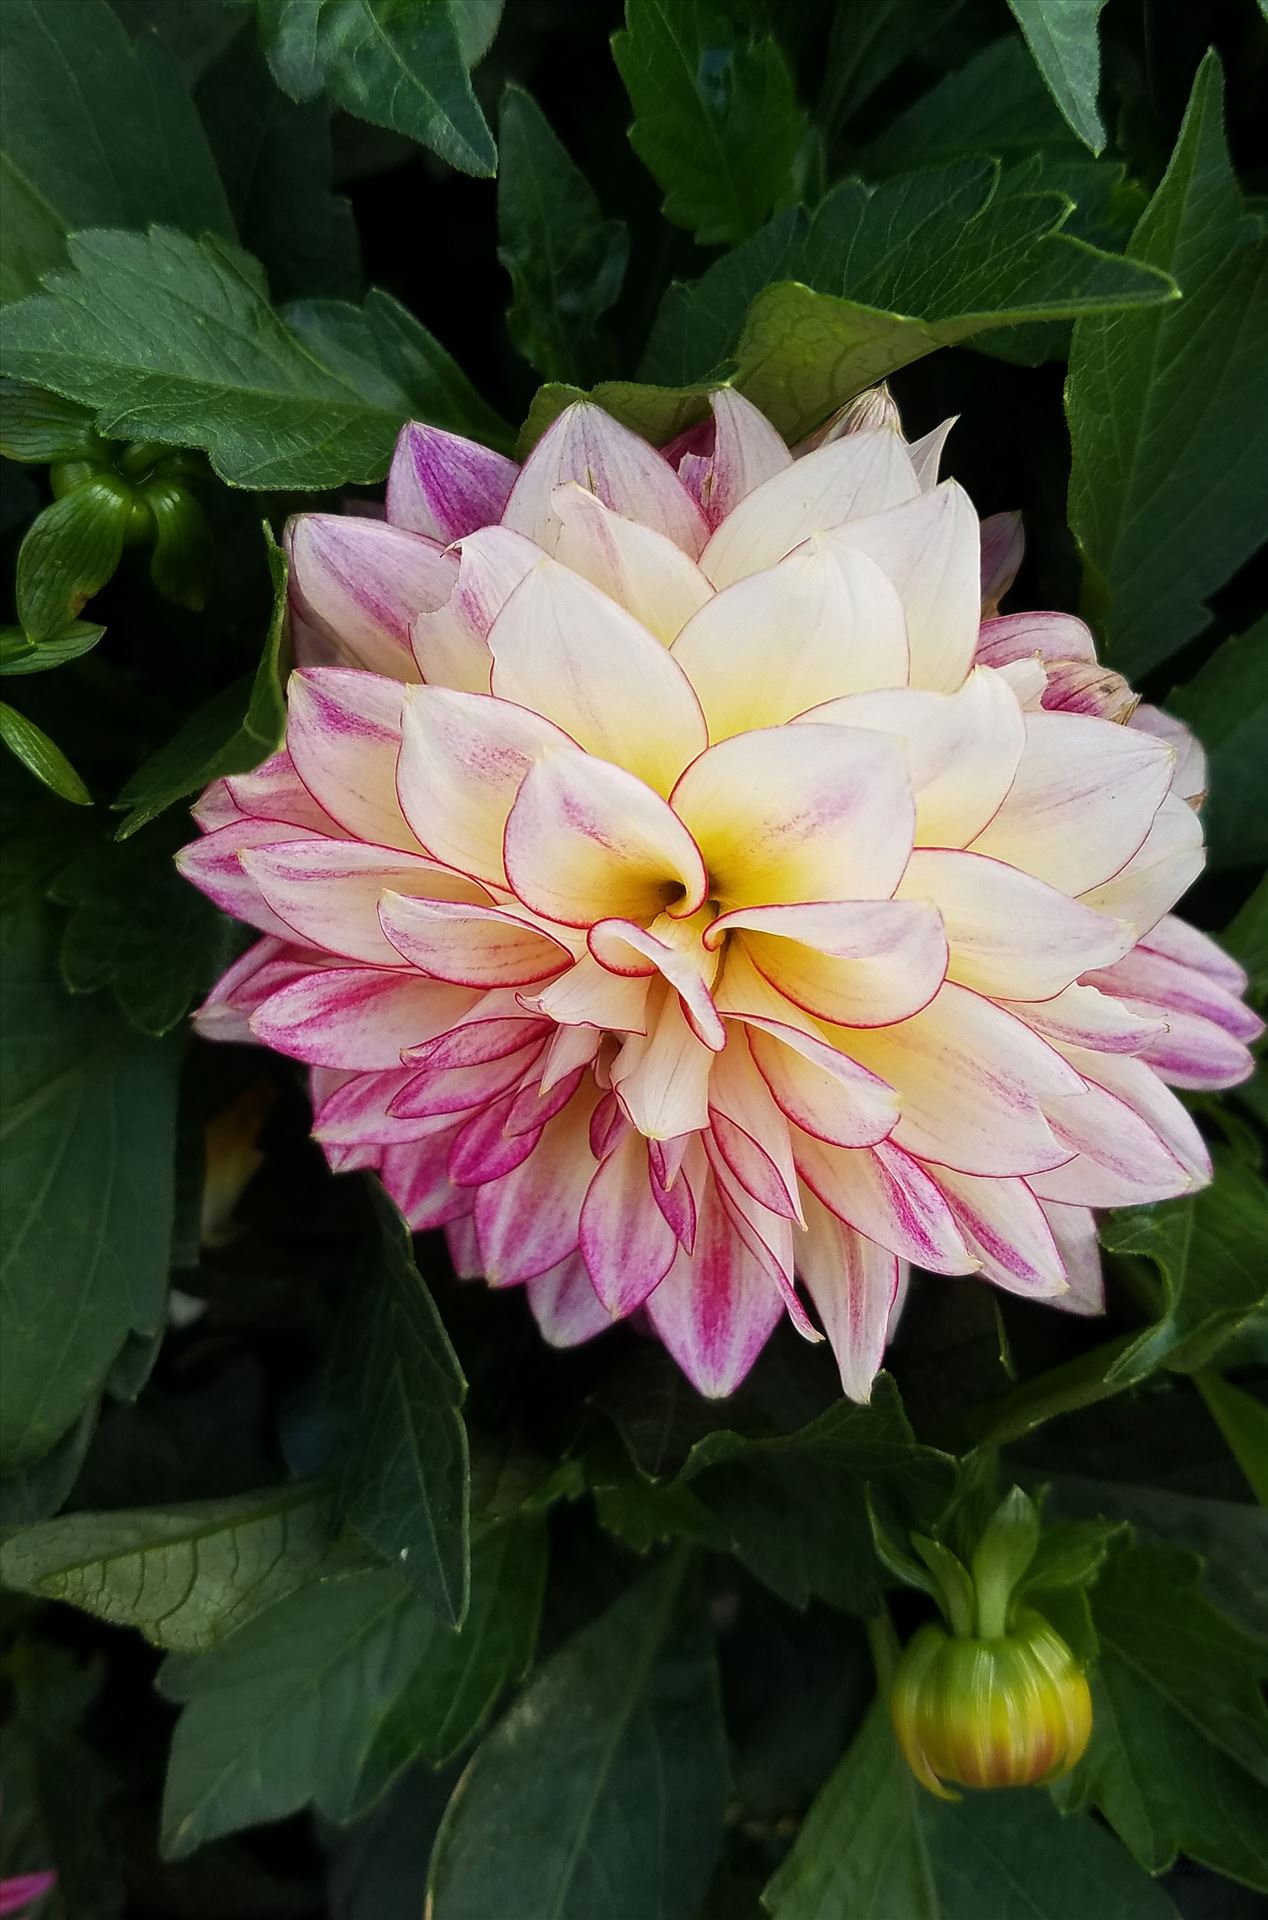 00-pink-dahlia-20170916_153120_A.jpg -  by CLStauber Photography